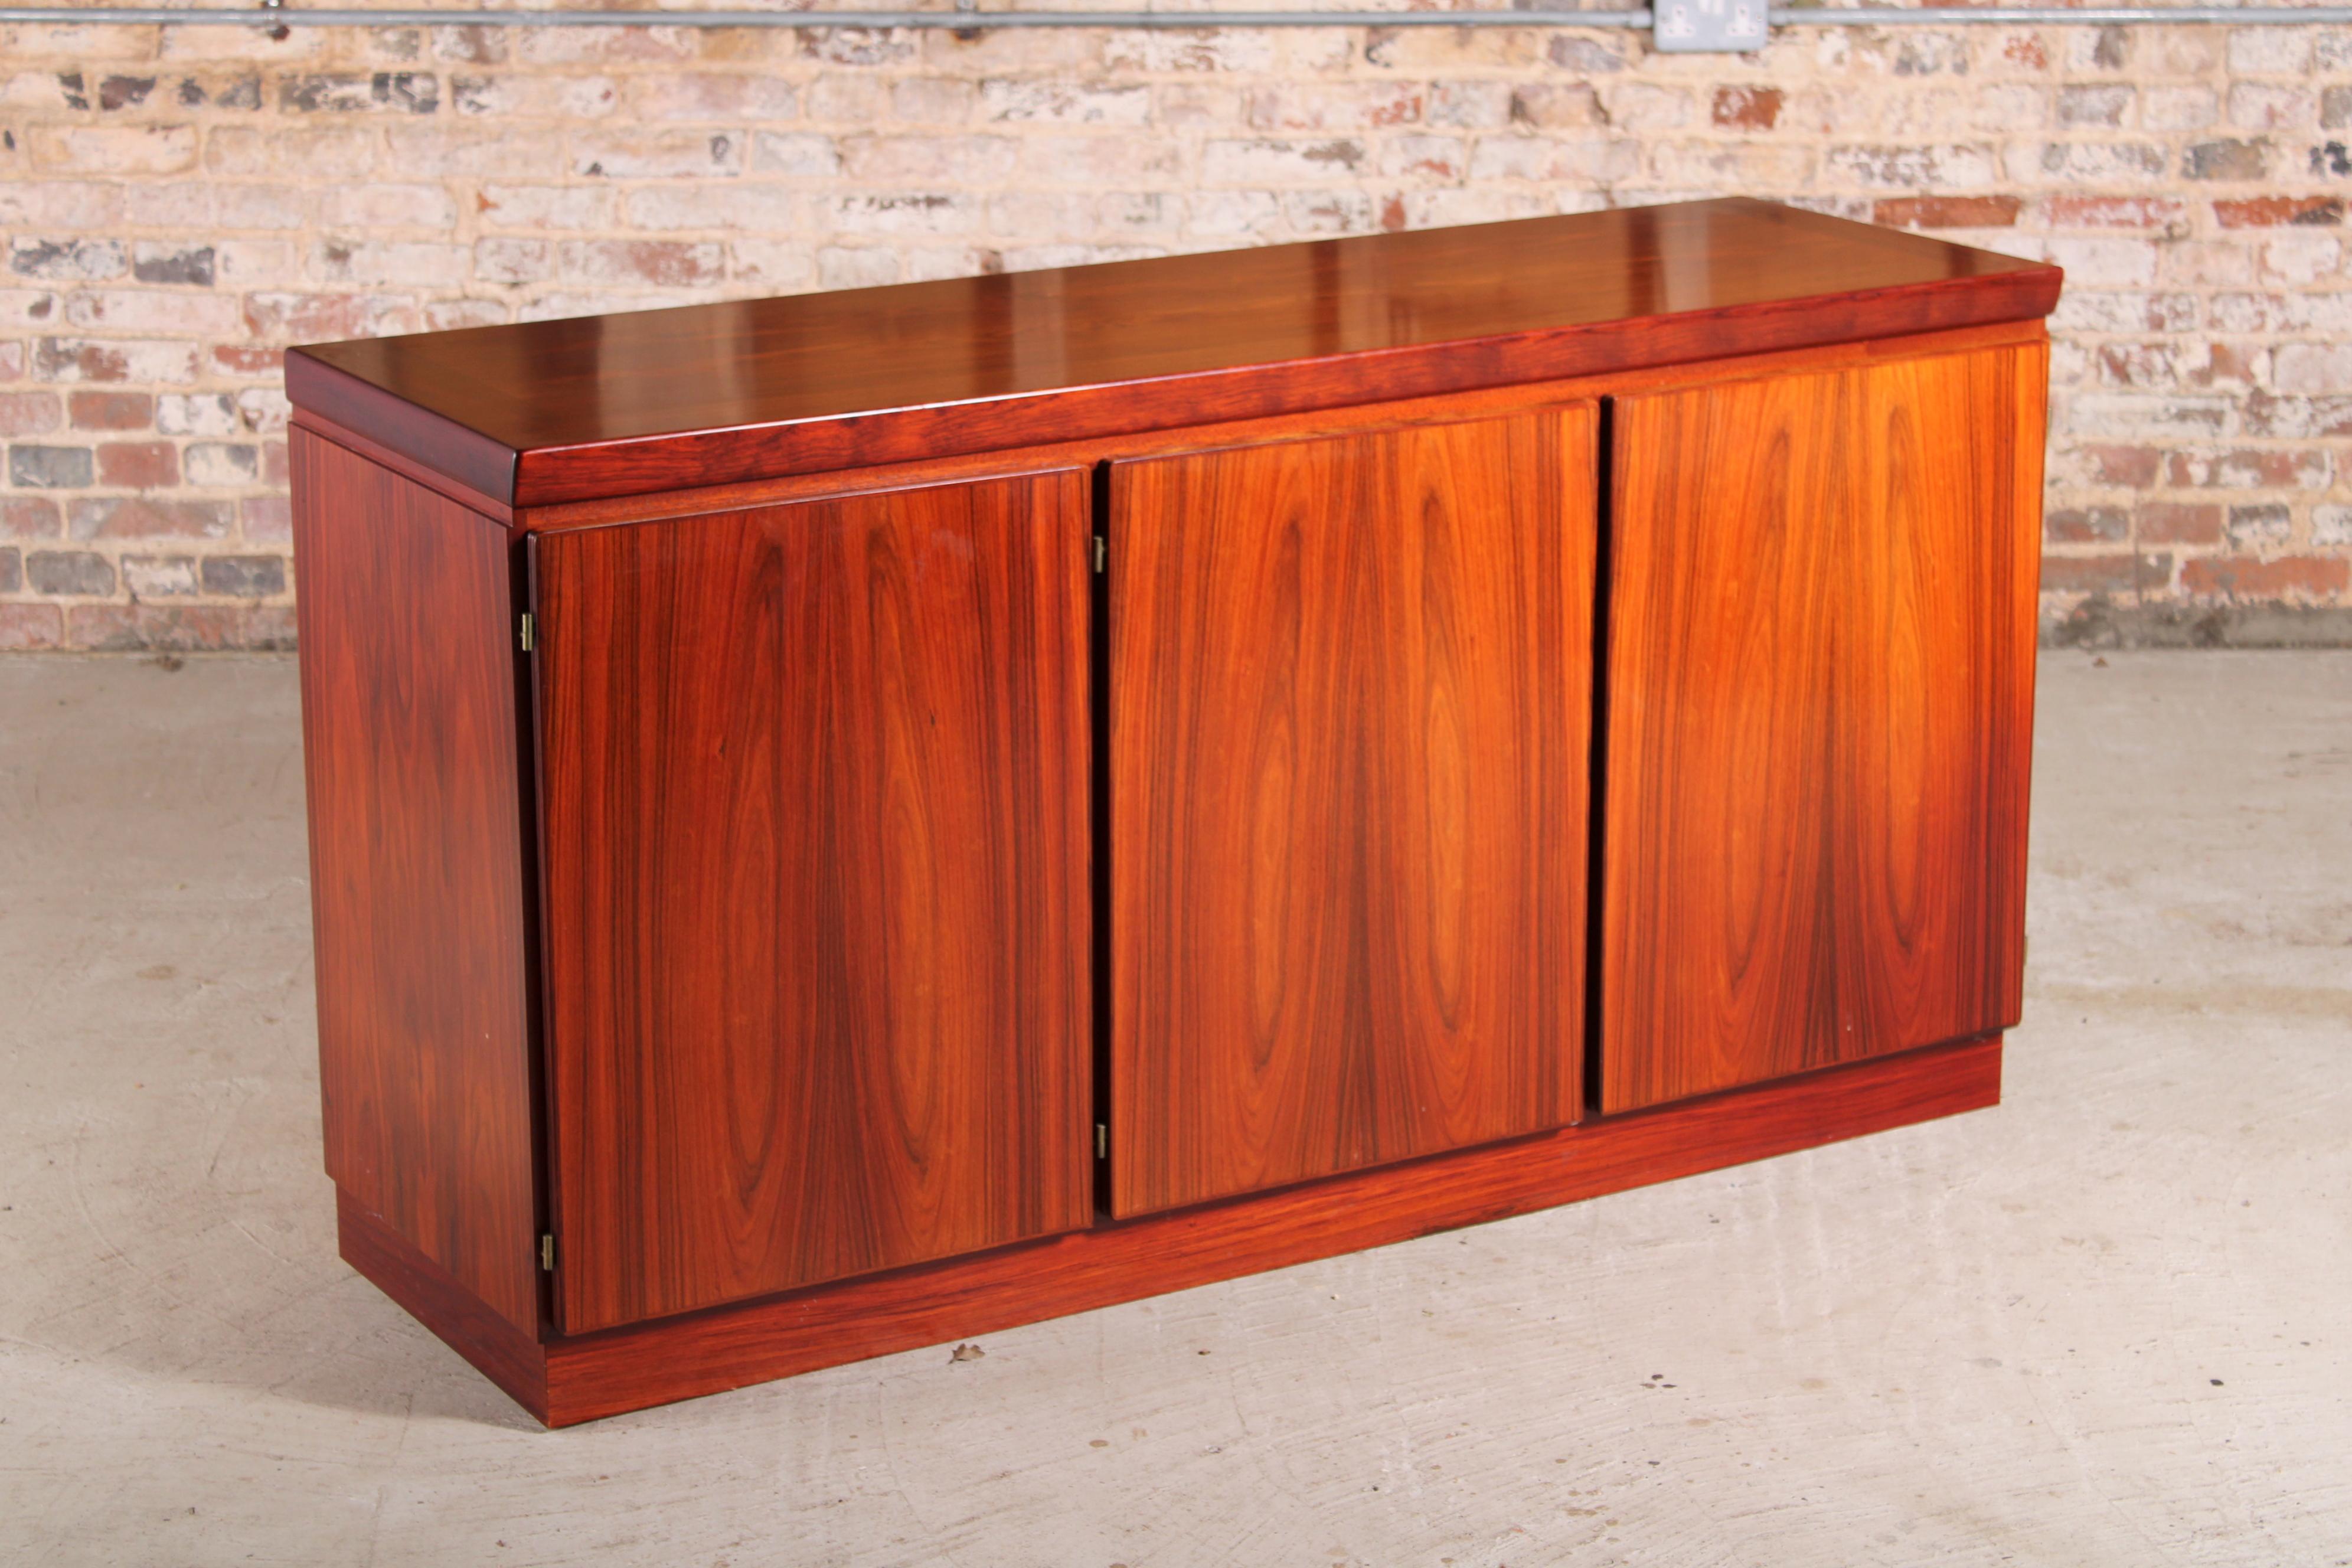 Danish mid century rosewood sideboard by Skovby, circa 1970s. Double cupboard with shelves and single cupboard with 5 felt lined drawers. Very good original condition. £750 Dealer #10

Measures: W 154cm
D 48cm
H 83cm.